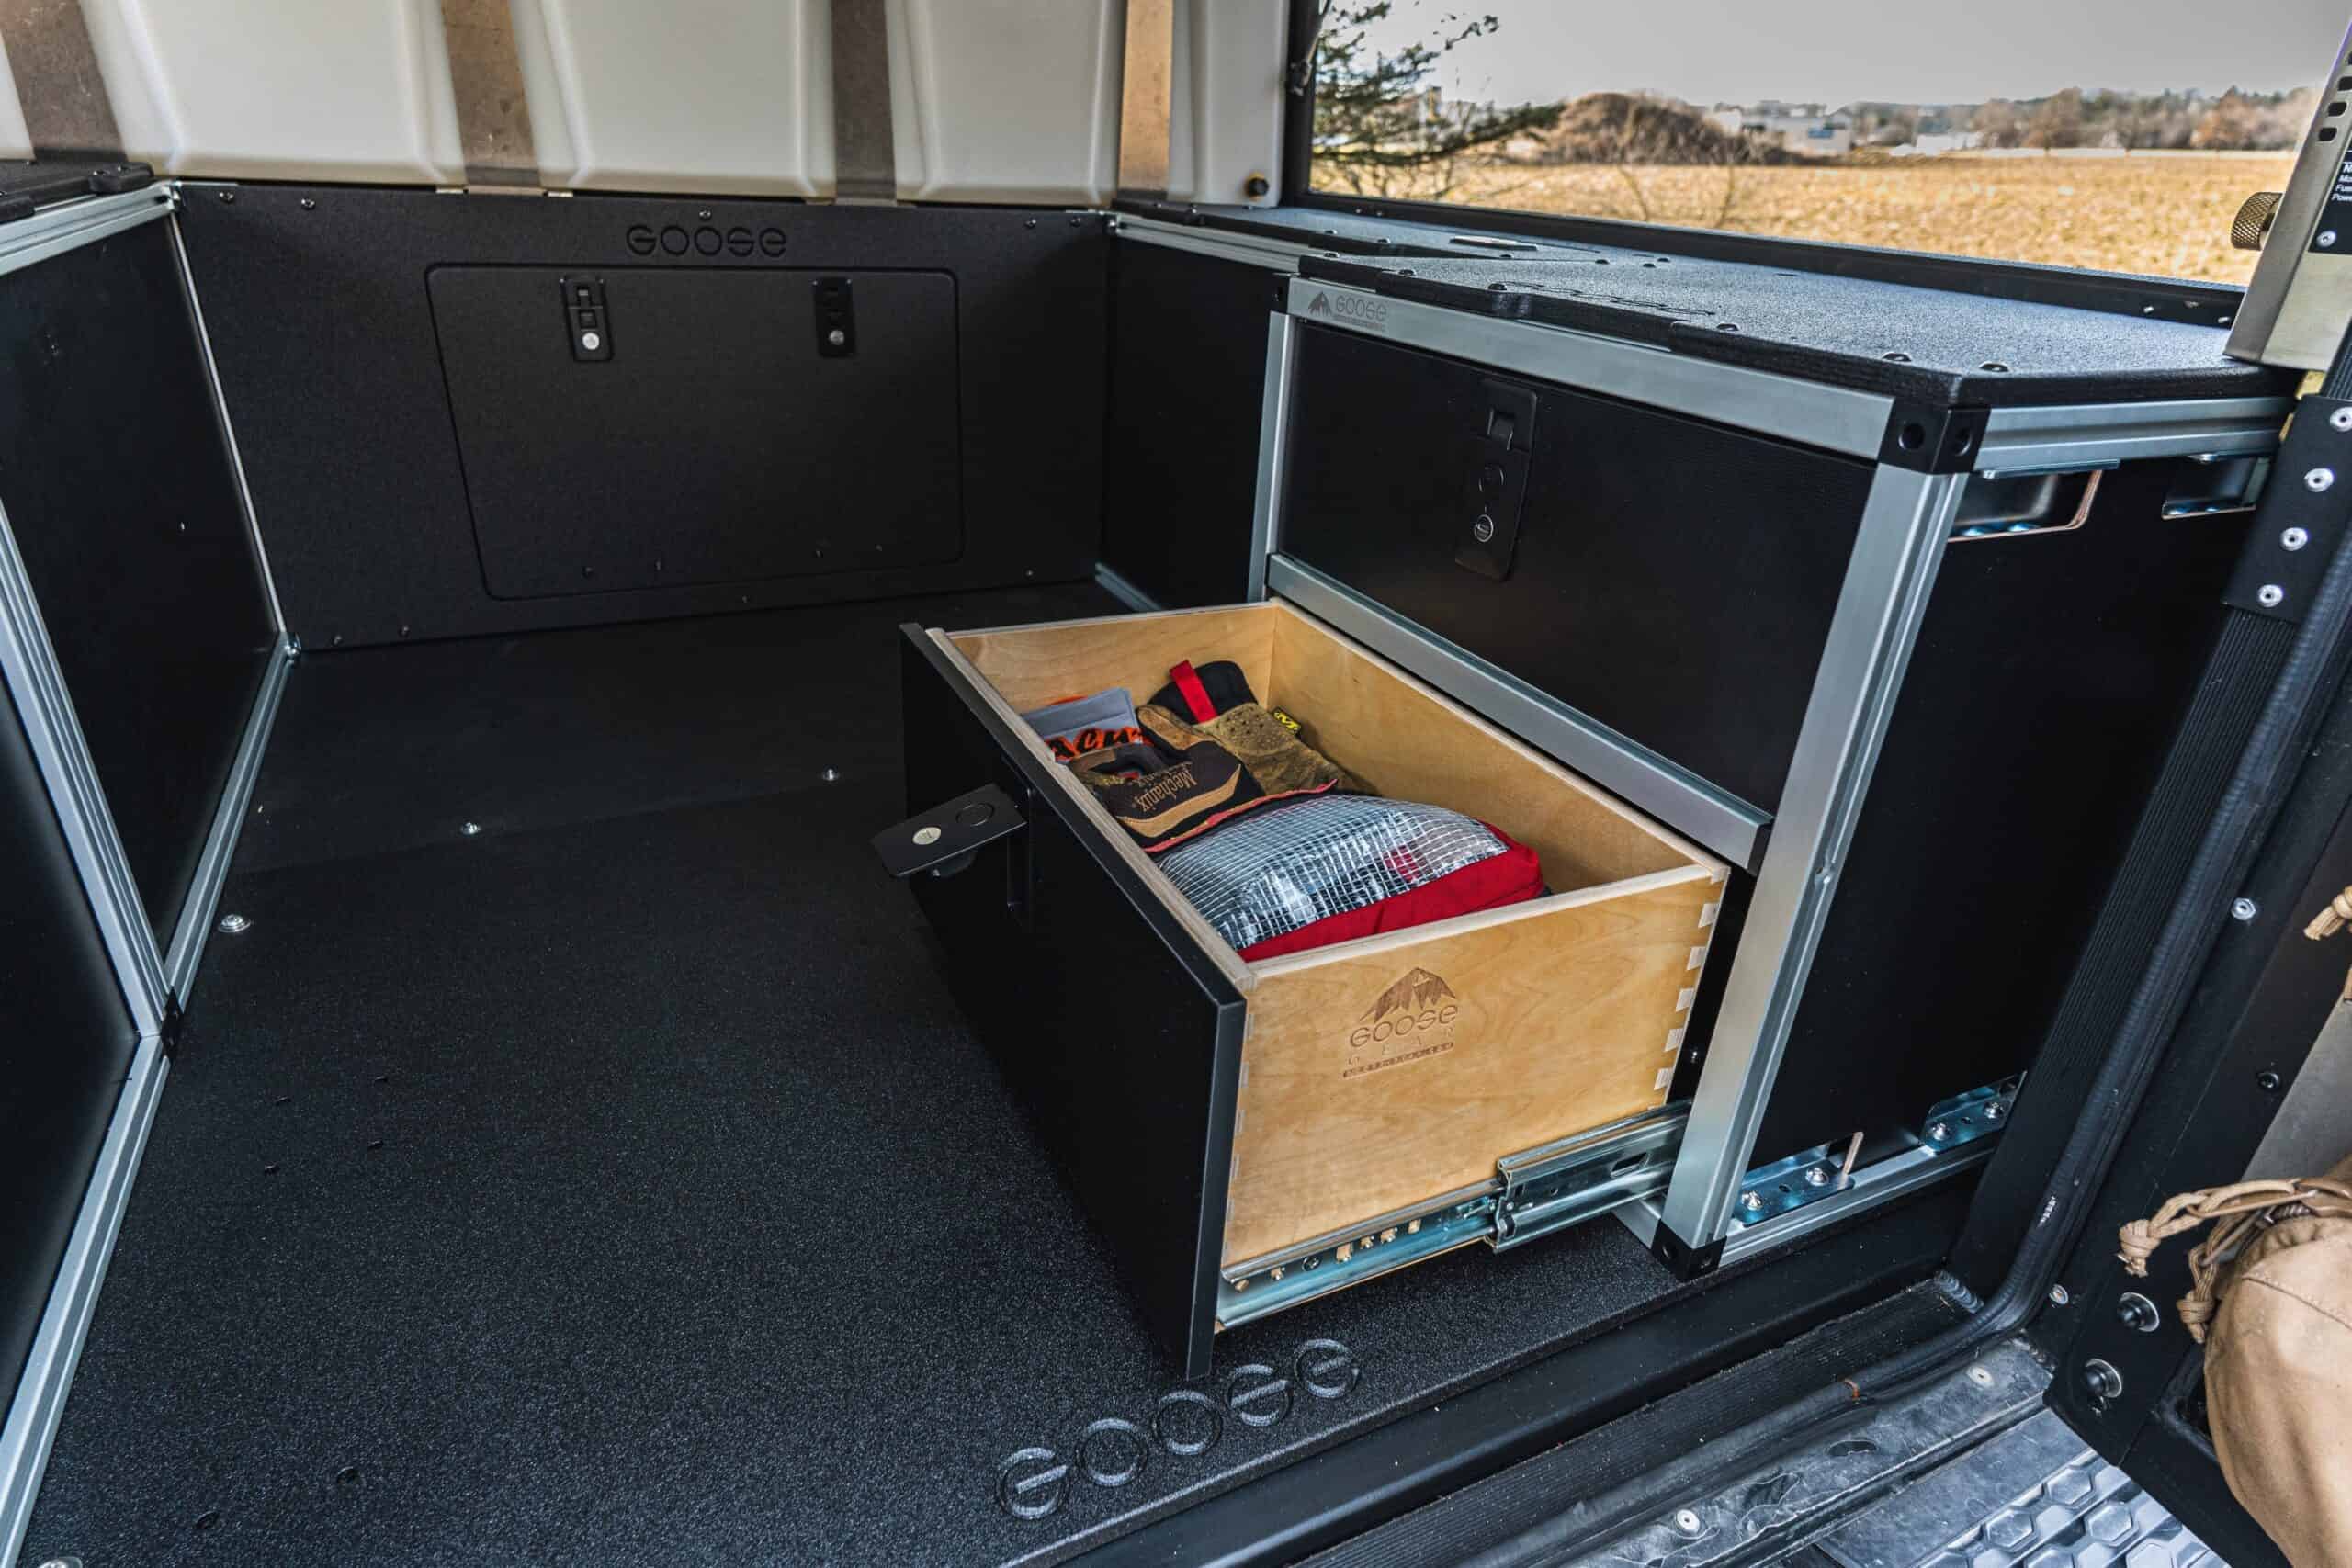 Alu-Cab Canopy Camper V2 - Chevy Colorado/GMC Canyon 2015-Present 2nd Gen. - Rear Double Drawer Module - 6' Bed